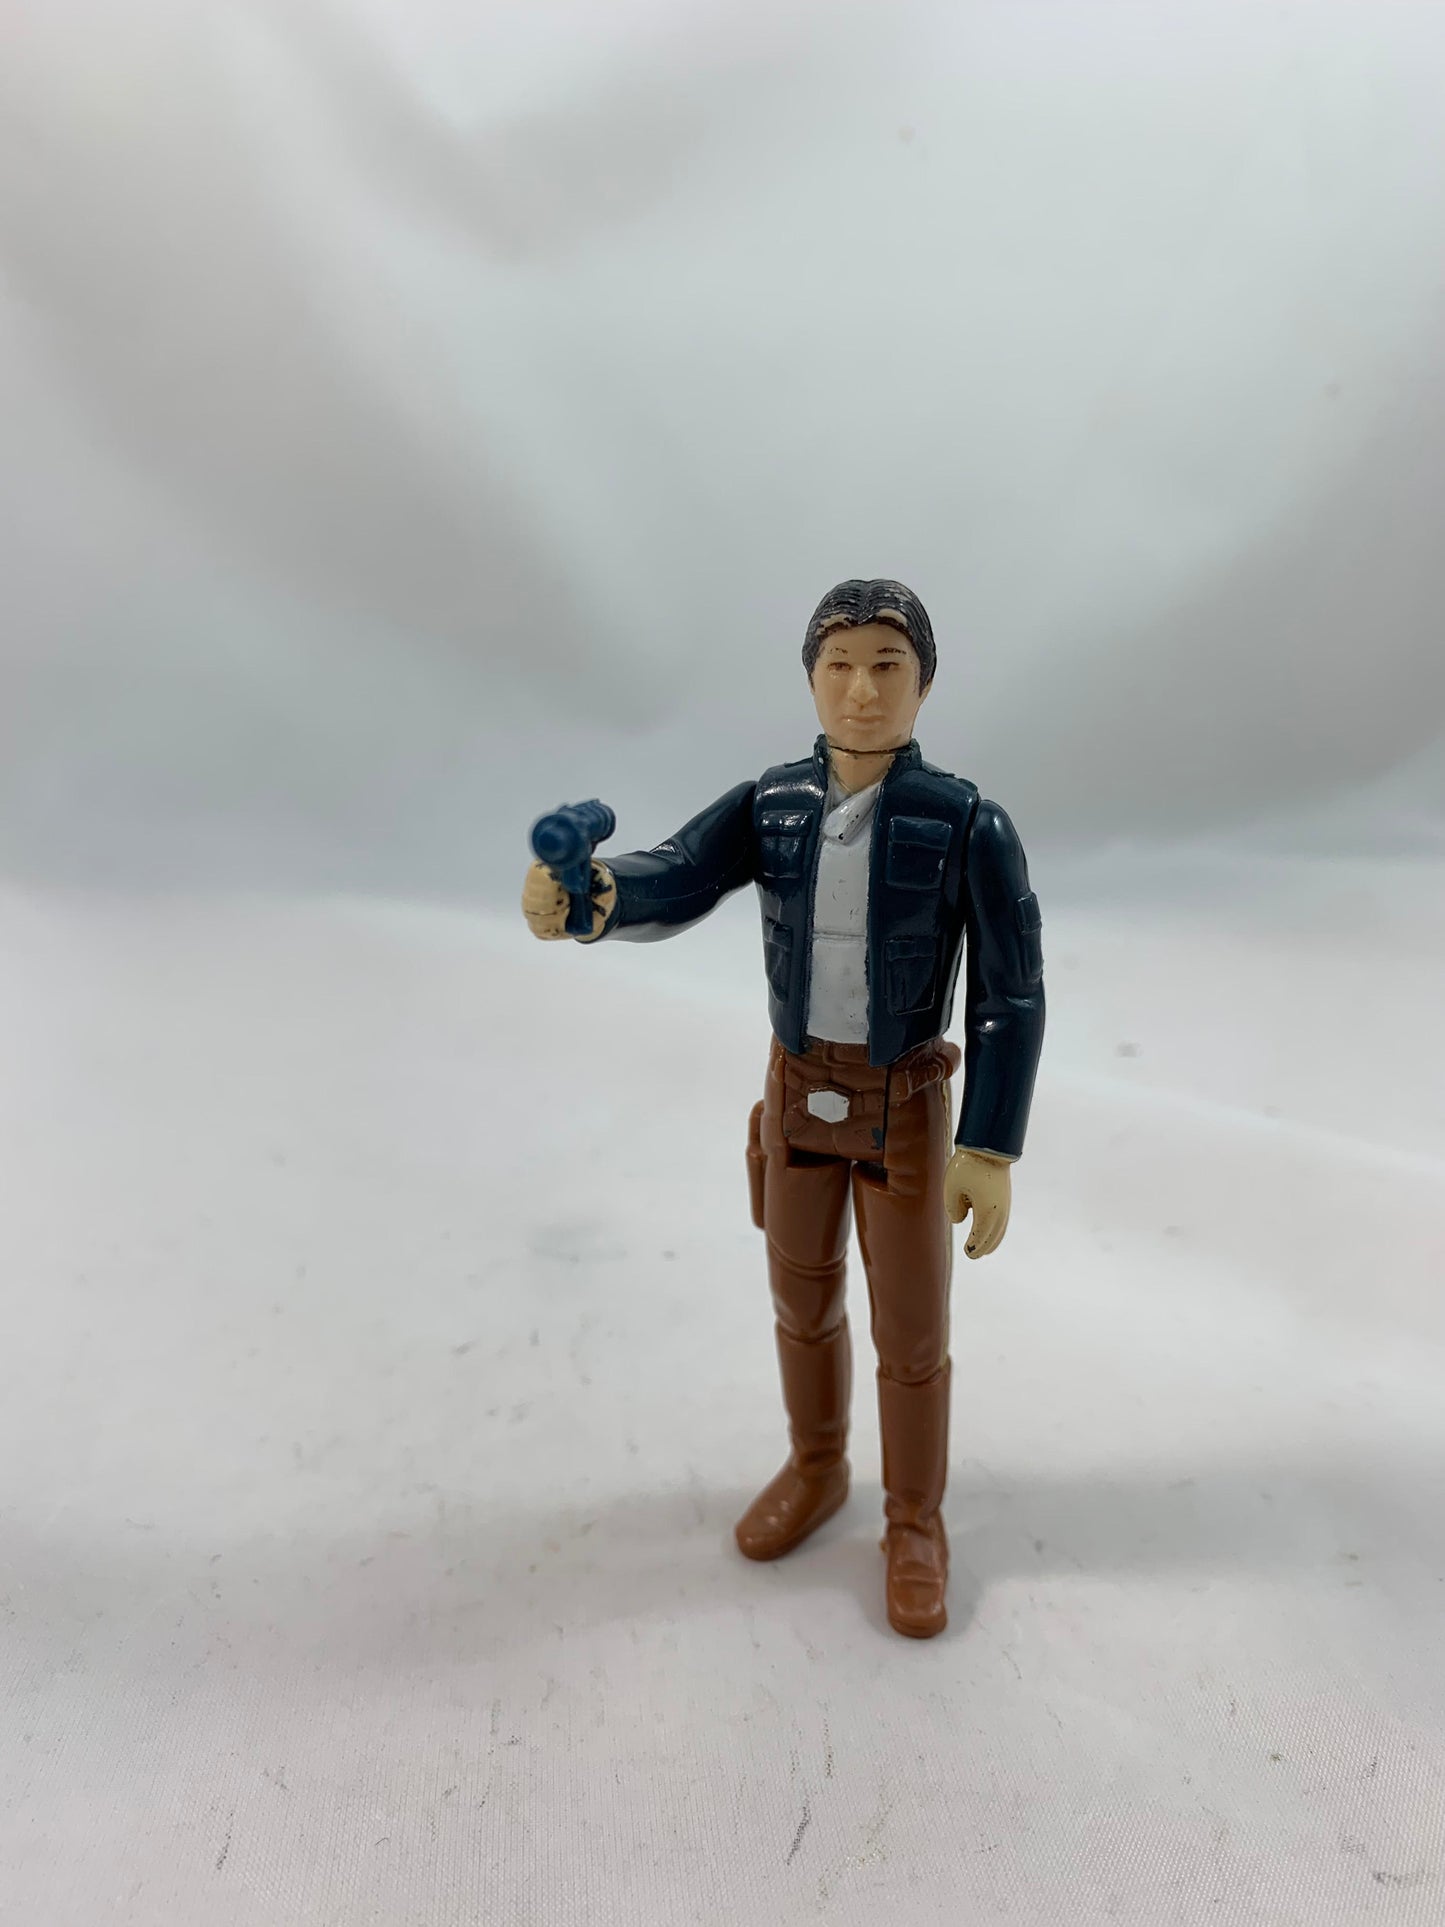 Kenner Vintage STAR WARS HAN SOLO (BESPIN OUTFIT) WITH ORIGINAL BLUE BLASTER COO: LFL 1980 MADE IN HONG KONG - Loose